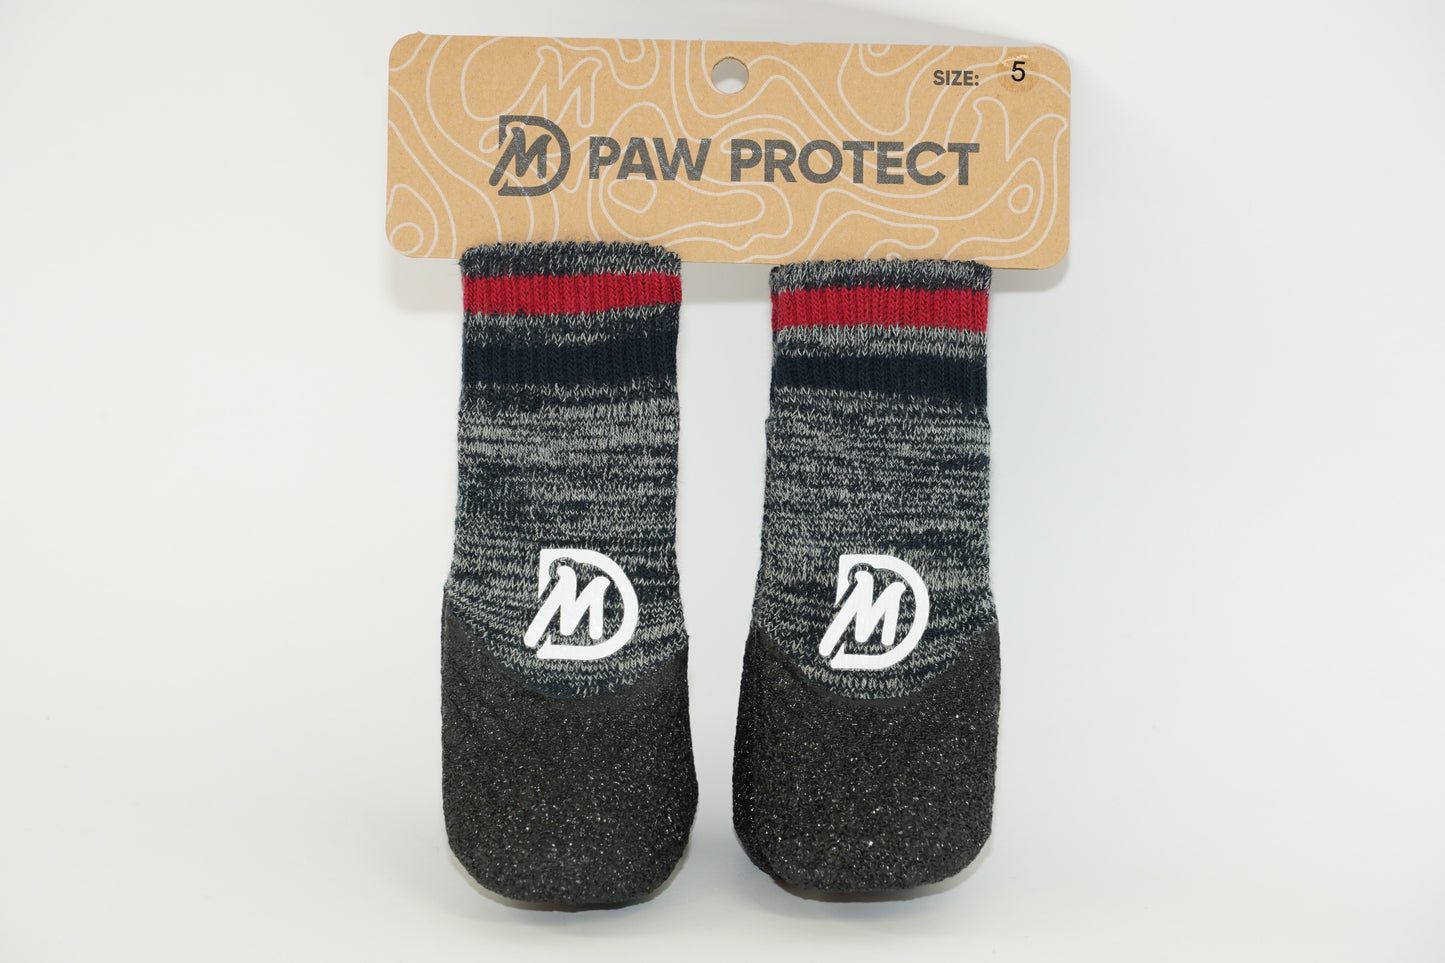 MDOG - Paw Protect Grip Socks (Pack of 4) *NEARLY GONE - REDUCED TO CLEAR*